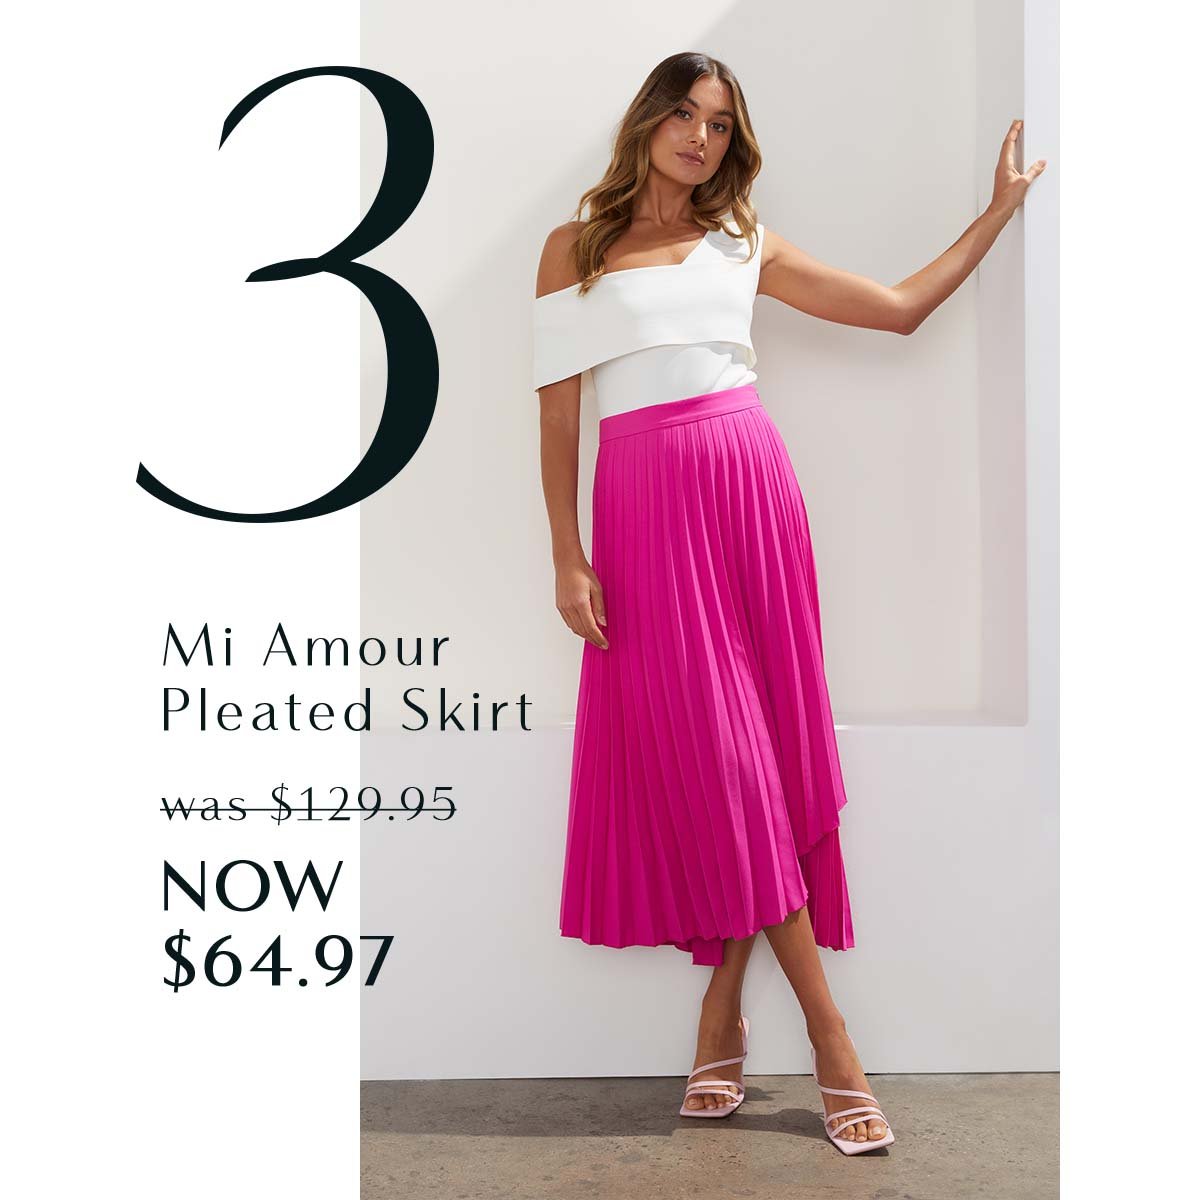 3. Mi Amour Pleated Skirt was $129.95 NOW $64.97